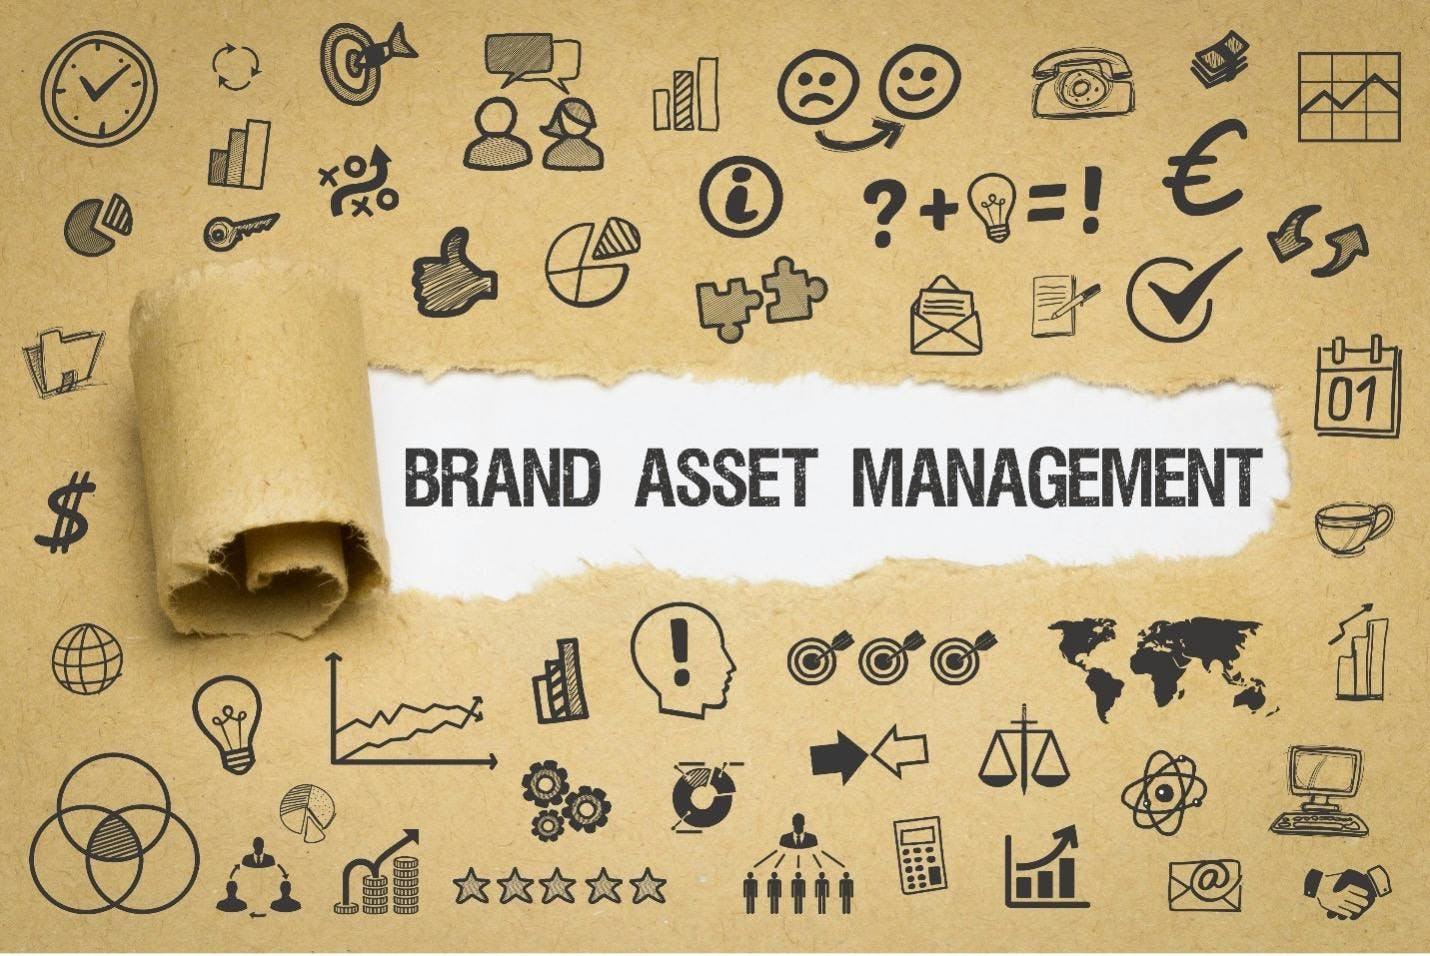 An image of a piece of sketch paper with lots of doodles and icons on it and the words "Brand asset management" in the center.